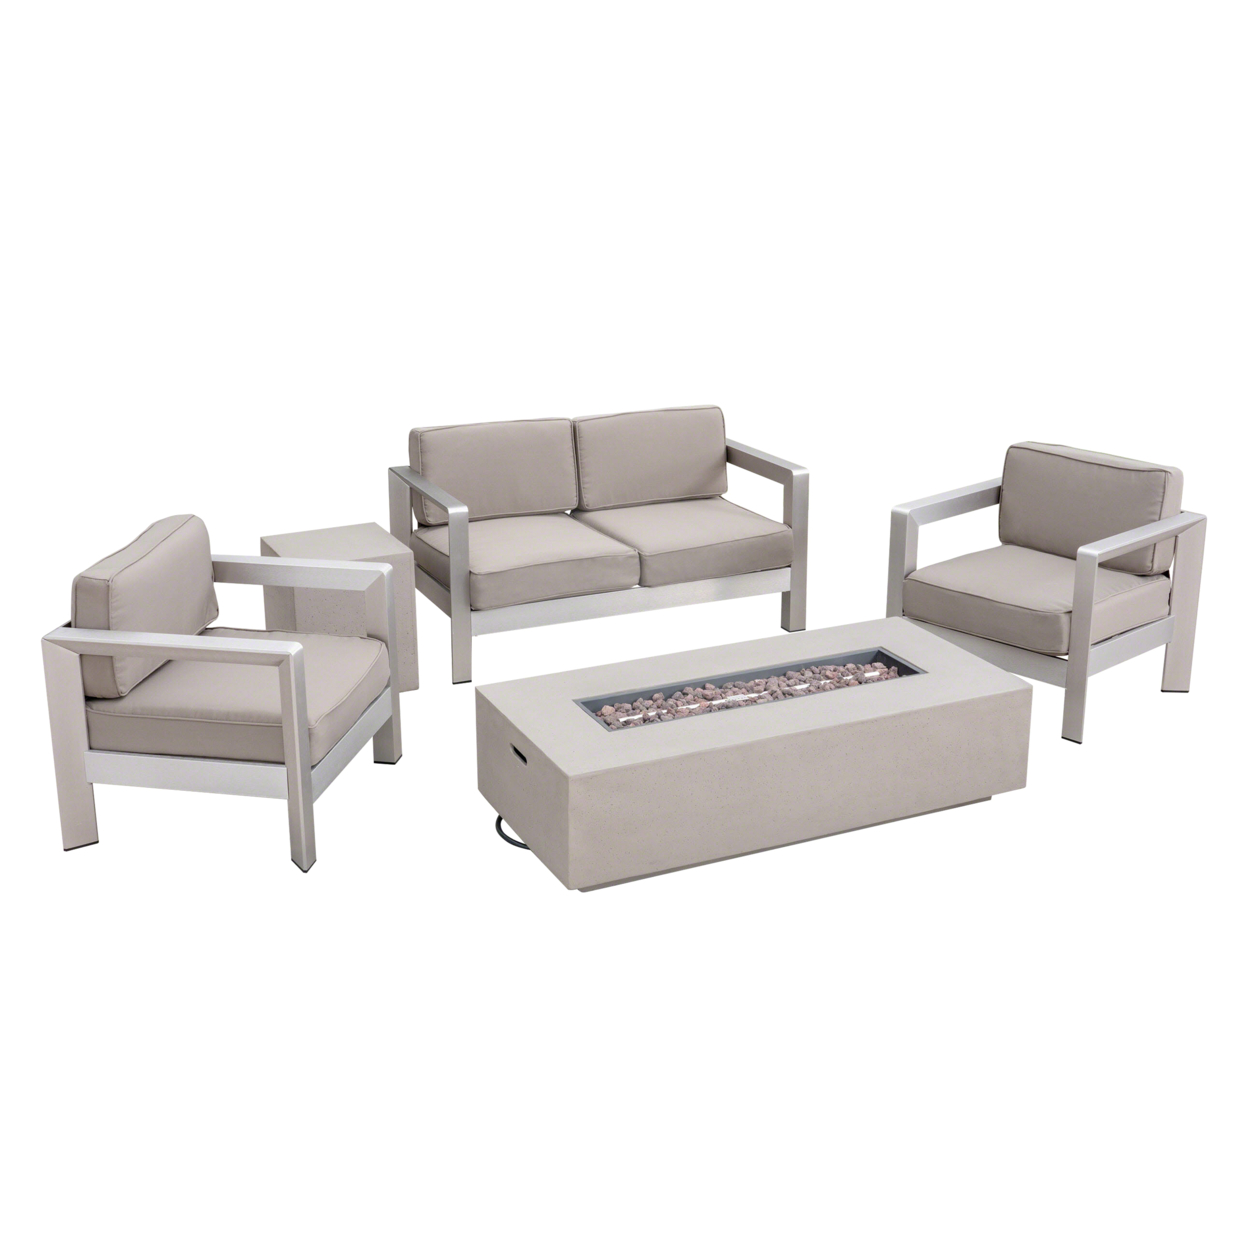 Alec Outdoor 4-Seater Aluminum Chat Set With Fire Pit And Tank Holder - Silver + Khaki + Dark Gray